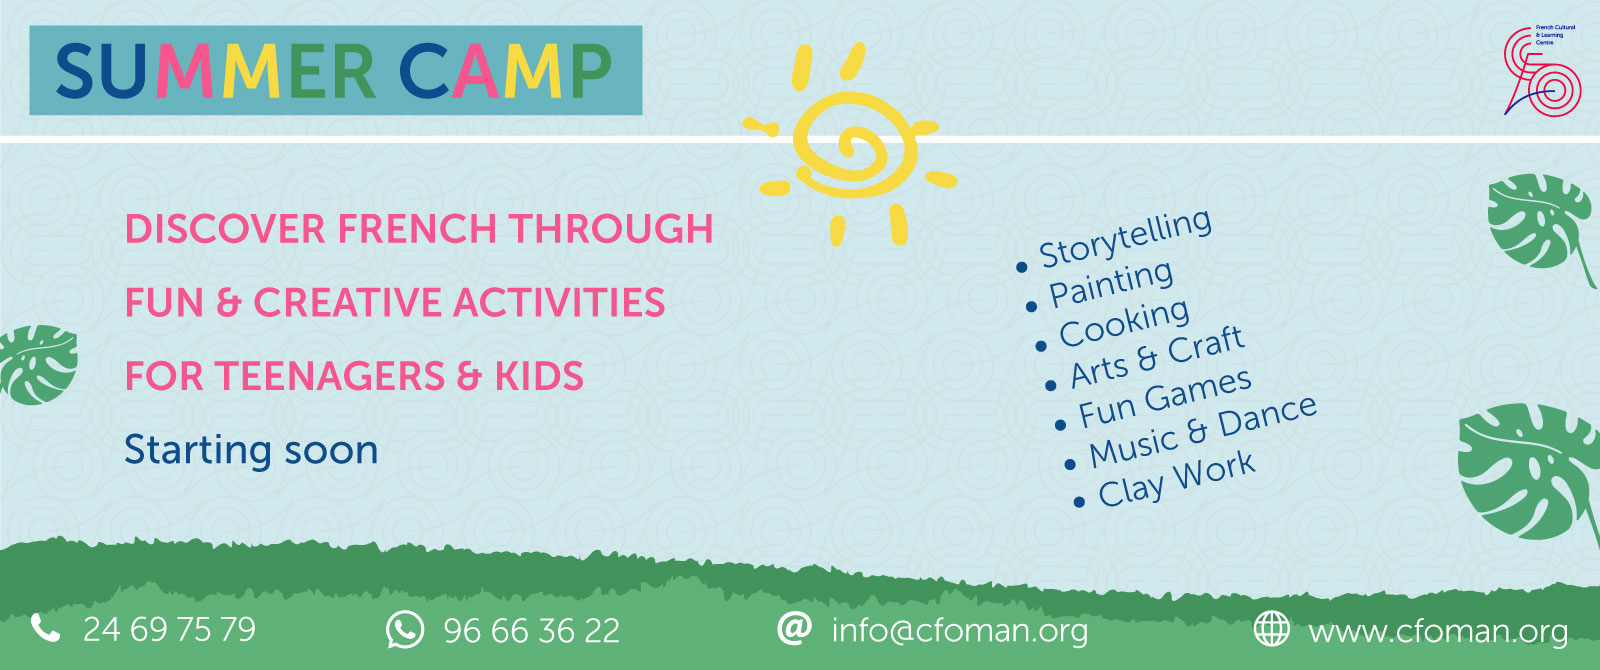 Registrations are open for our CFO summer camps!